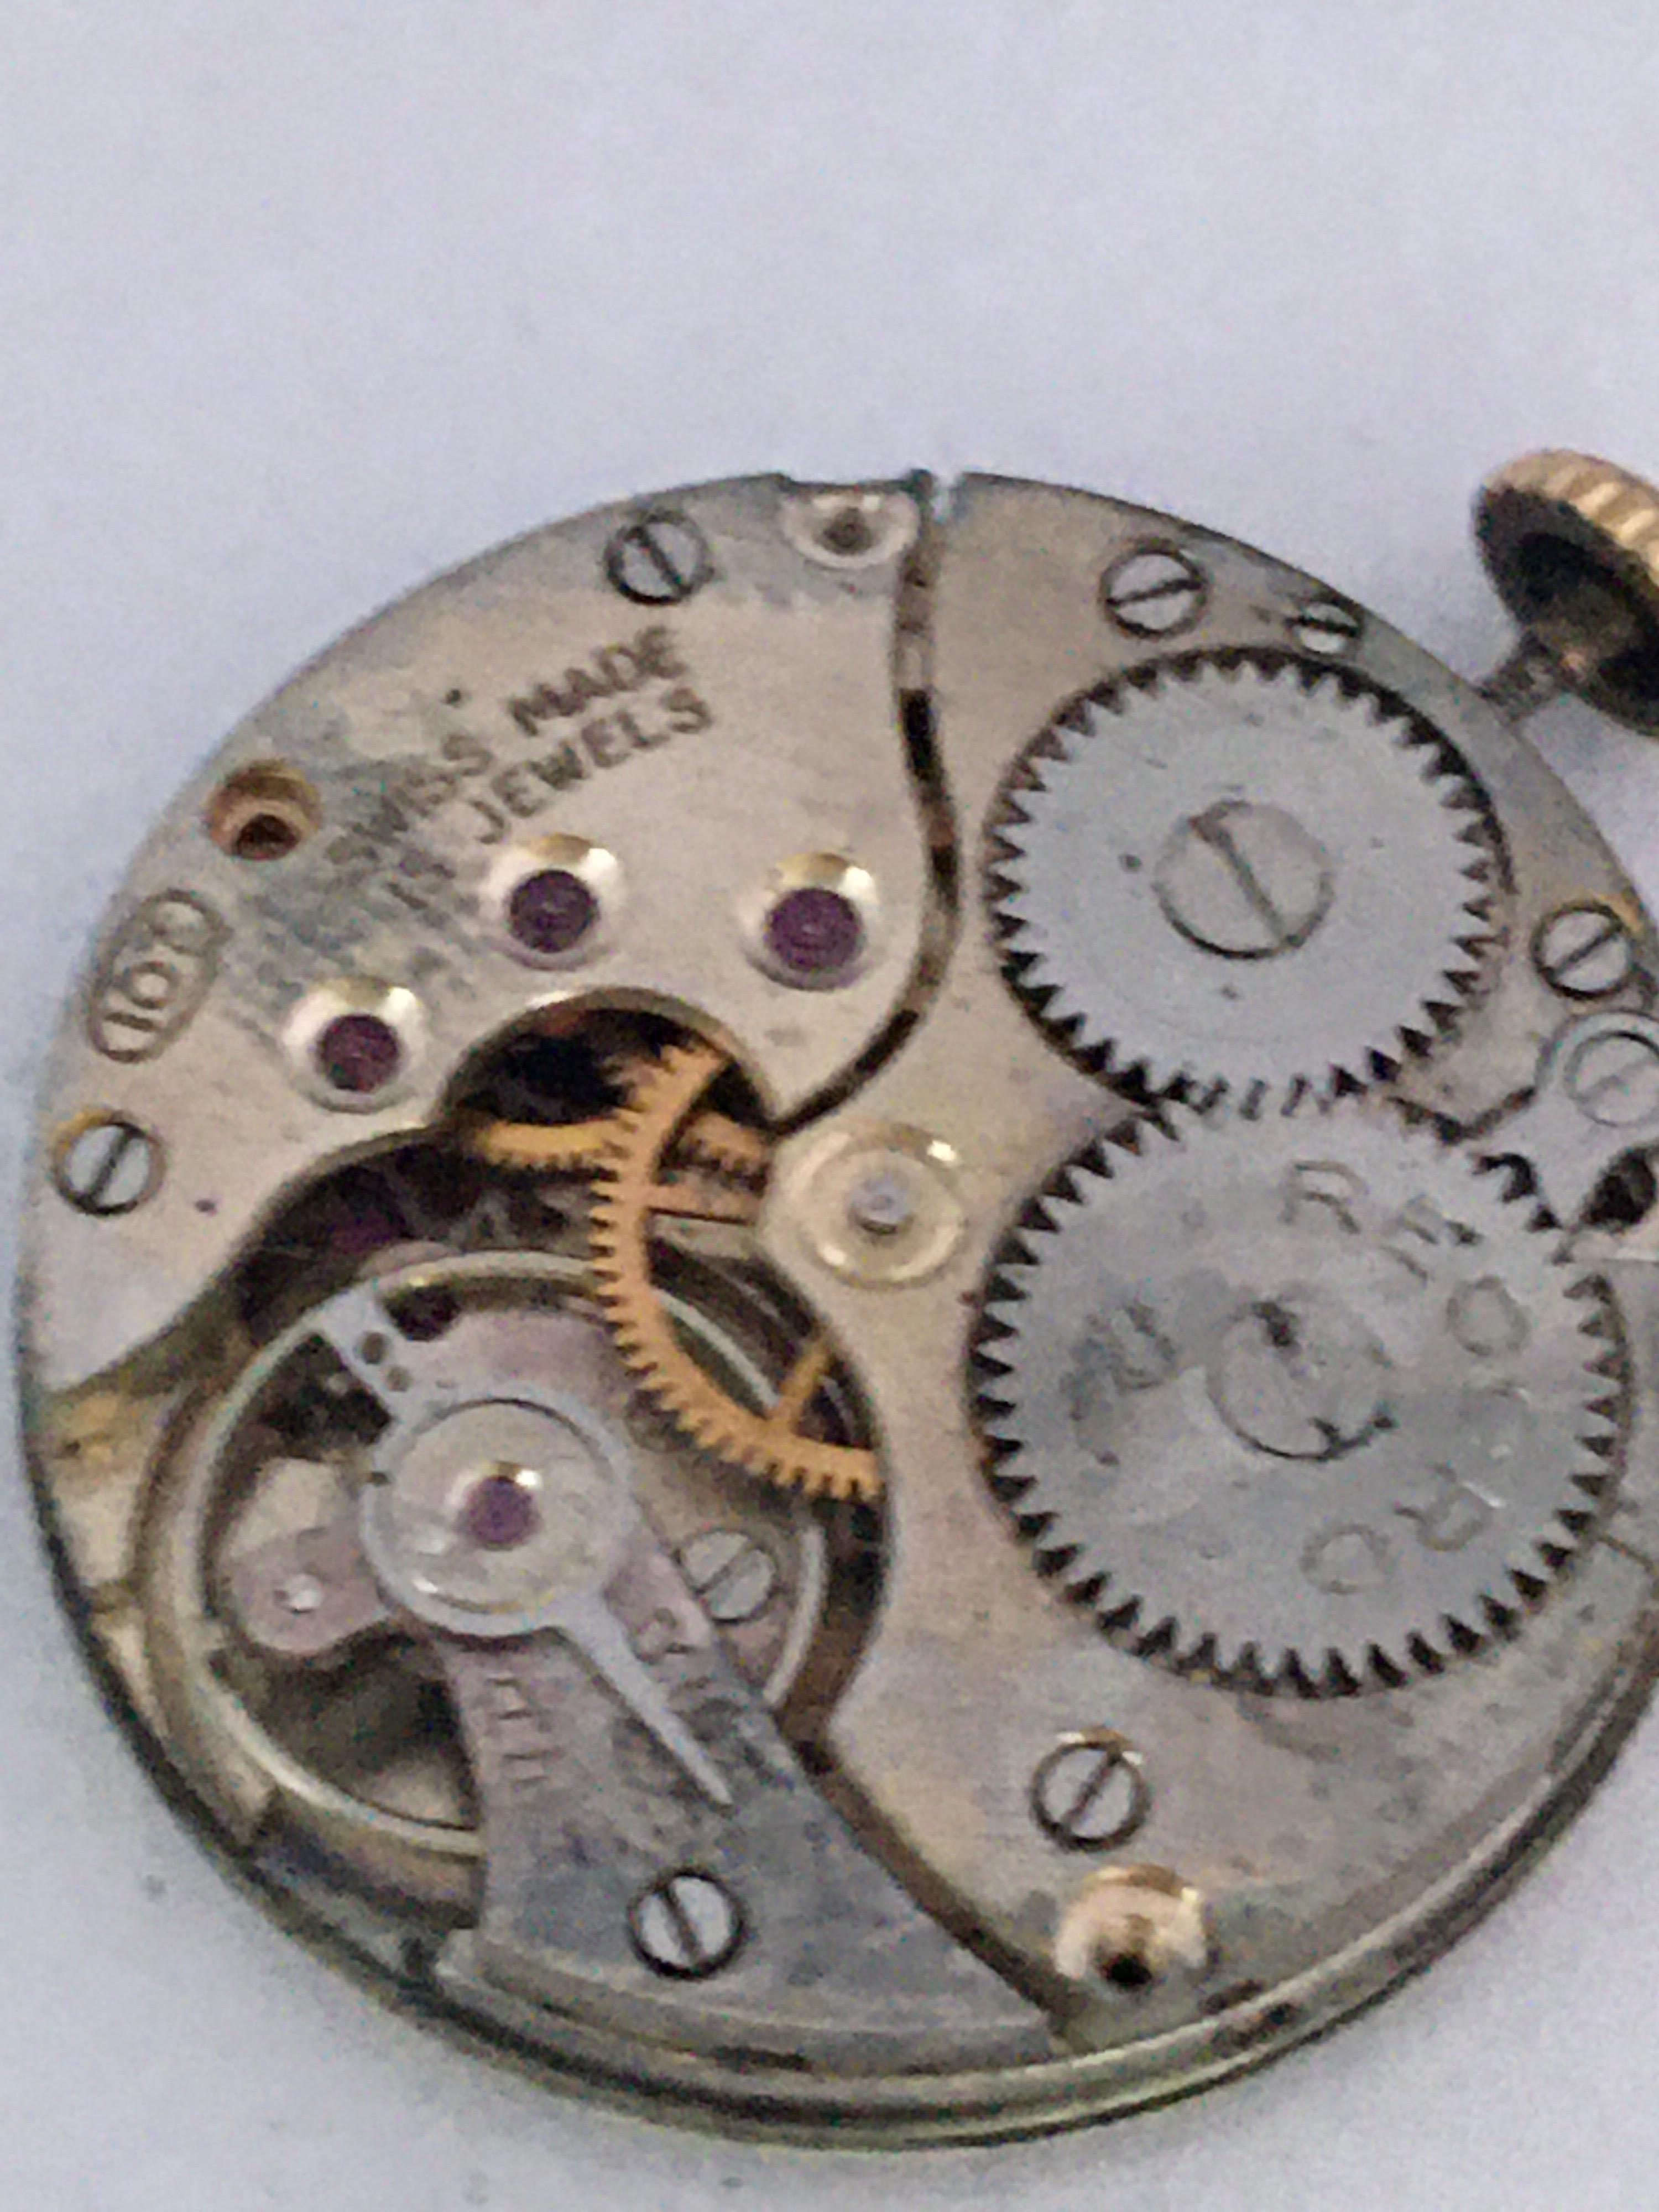 9 Karat Gold Vintage 1950s Récord Cushion Shaped Mechanical Watch For Sale 8